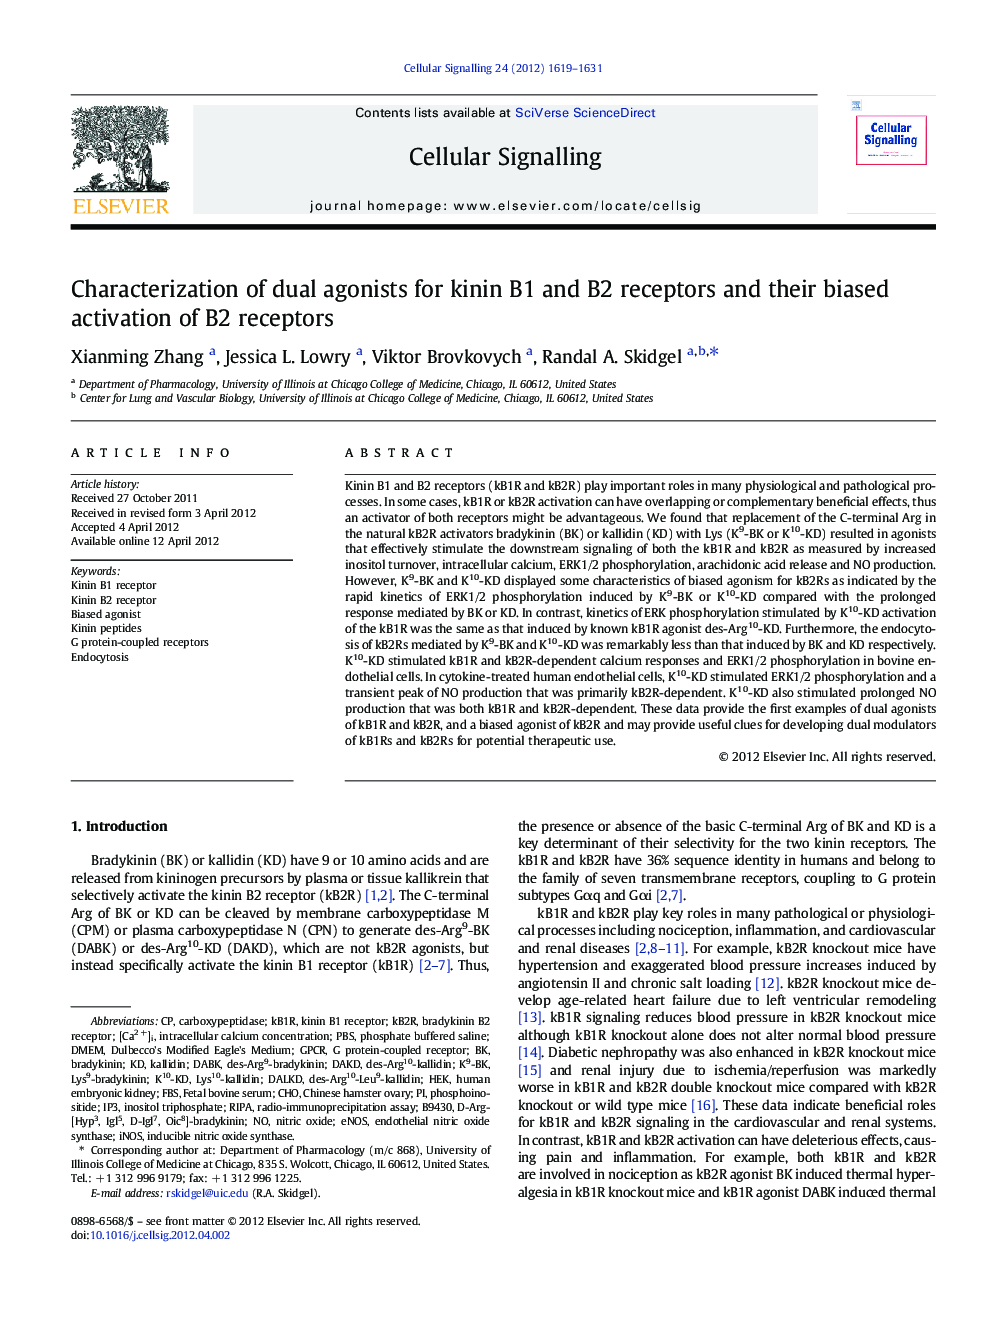 Characterization of dual agonists for kinin B1 and B2 receptors and their biased activation of B2 receptors